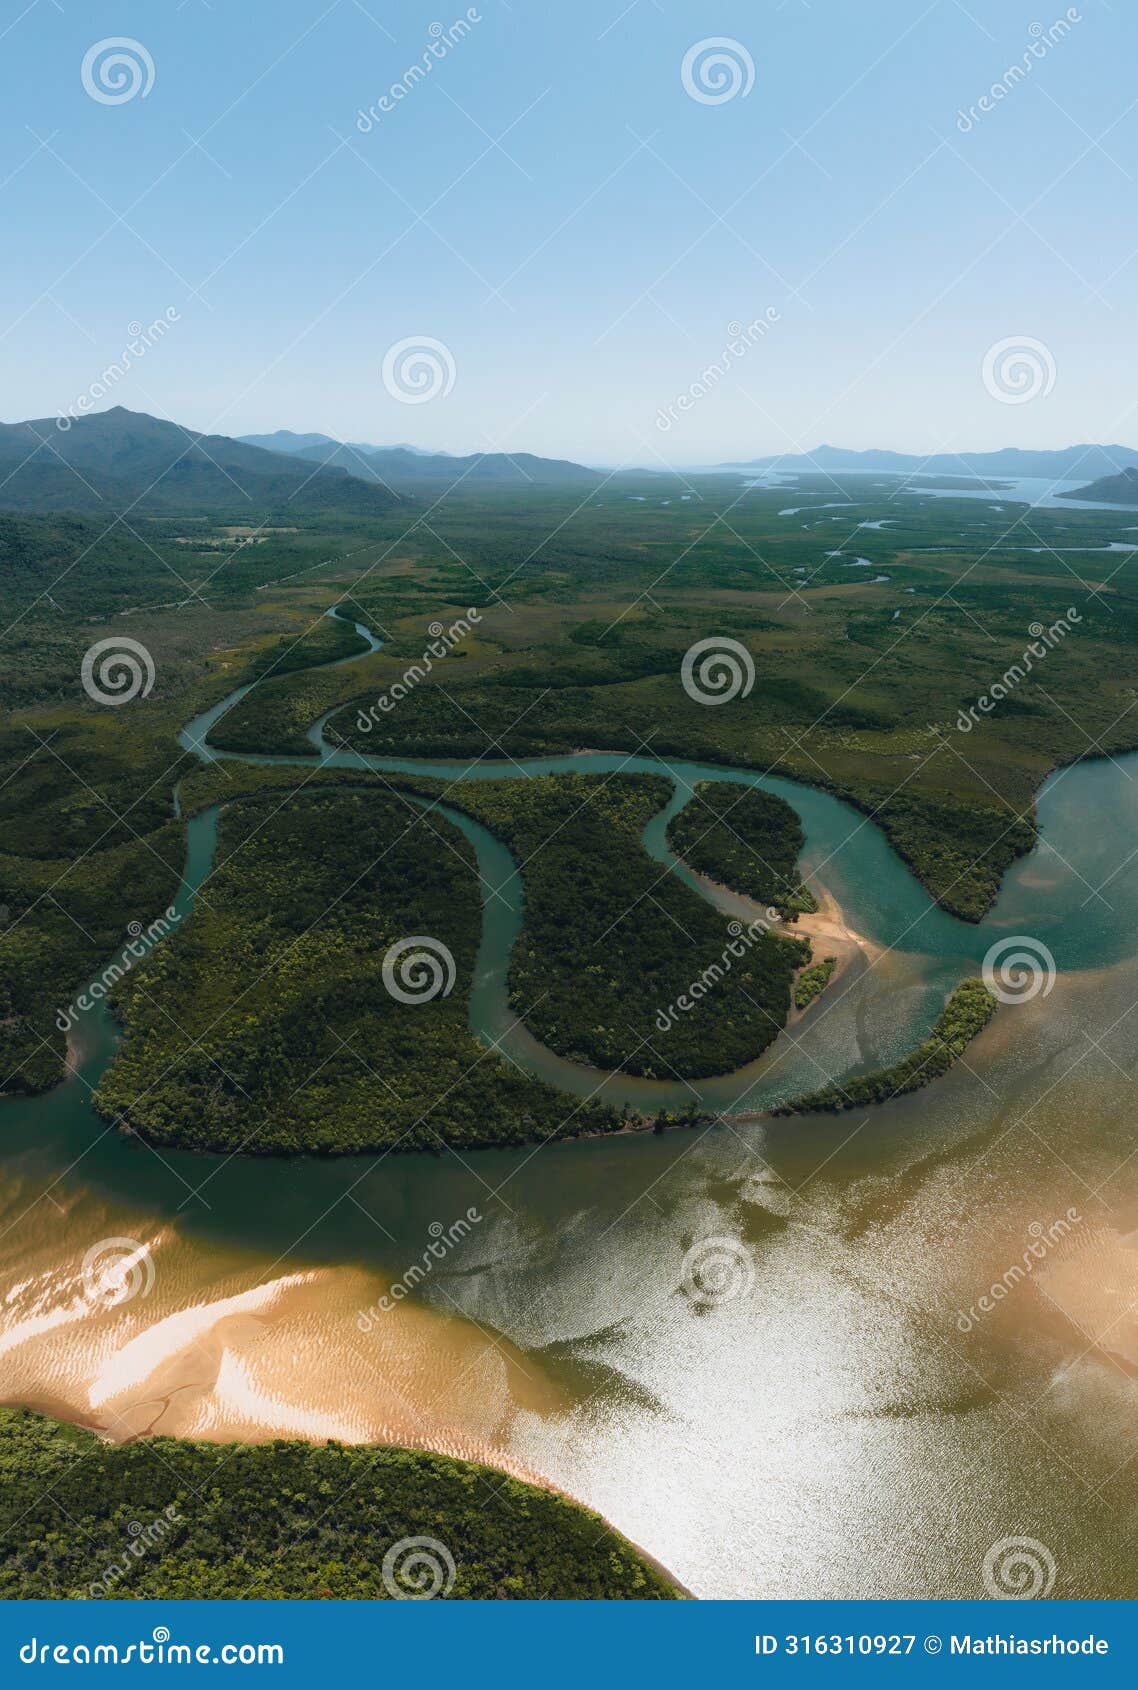 aerial view of mangroves in hinchinbrook national park. mountains, rivers and ramsay bay beach along the thorsborne